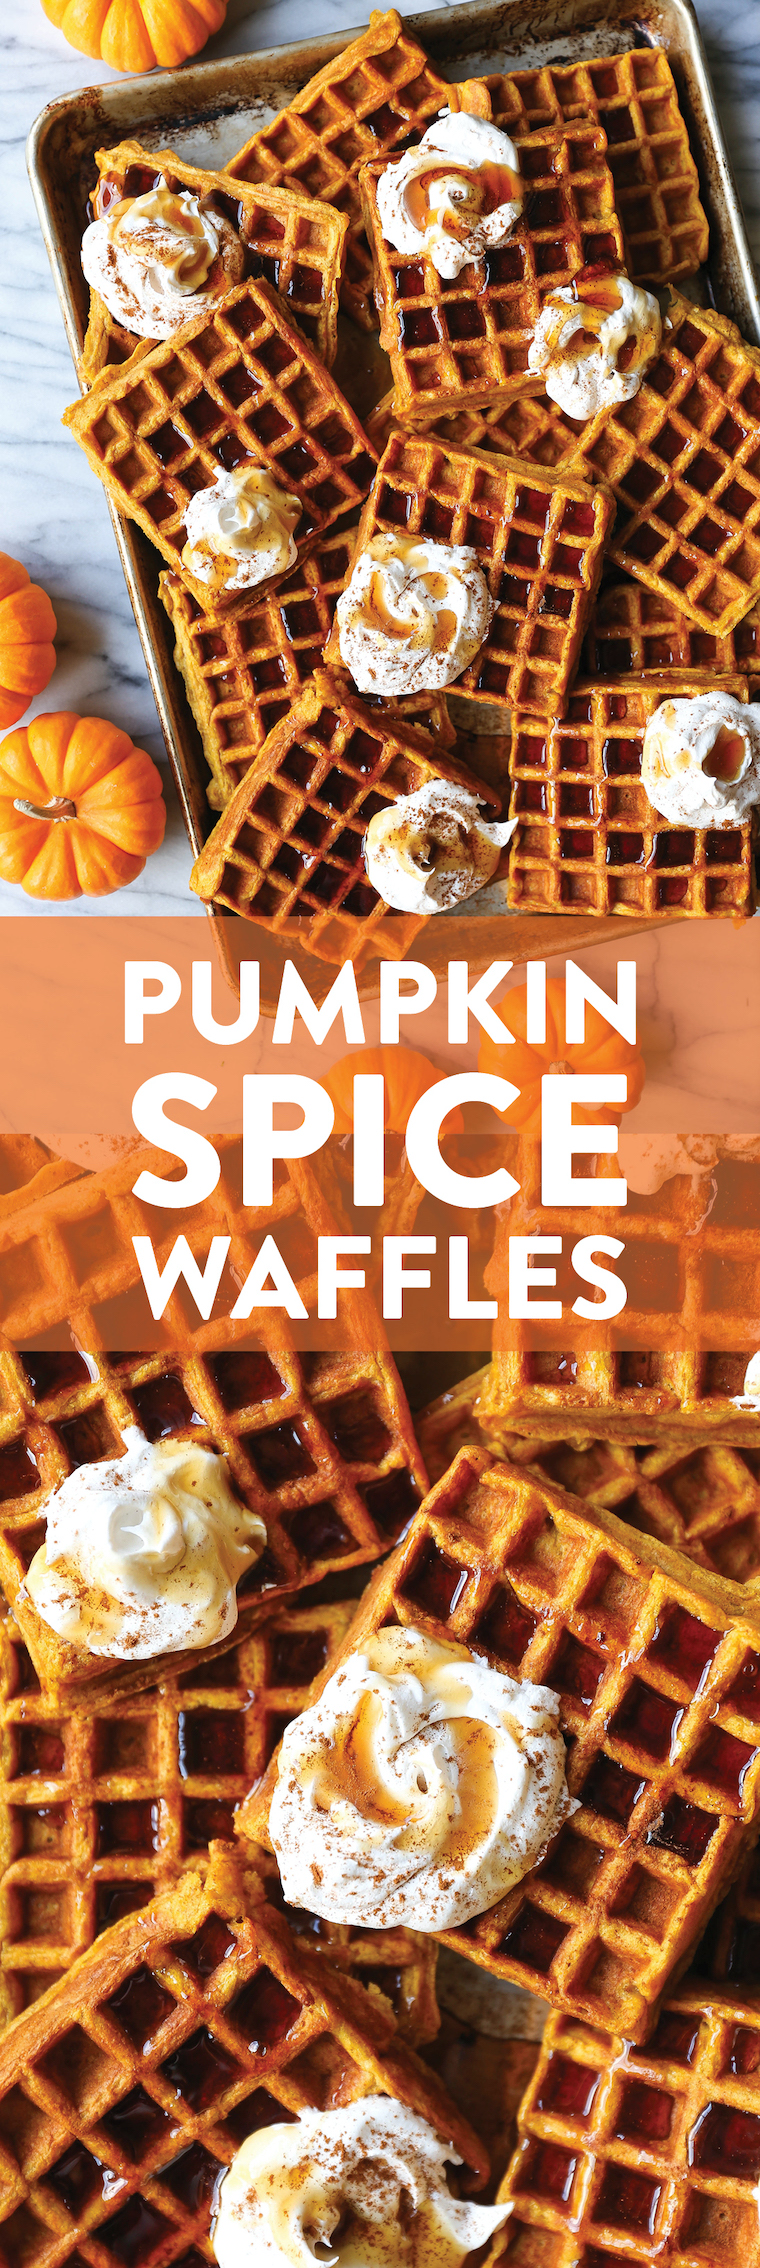 Pumpkin Spice Waffles - The best breakfast! Crispy golden on the outside, fluffy on the inside. You'll seriously want to make this all year long! SO GOOD.